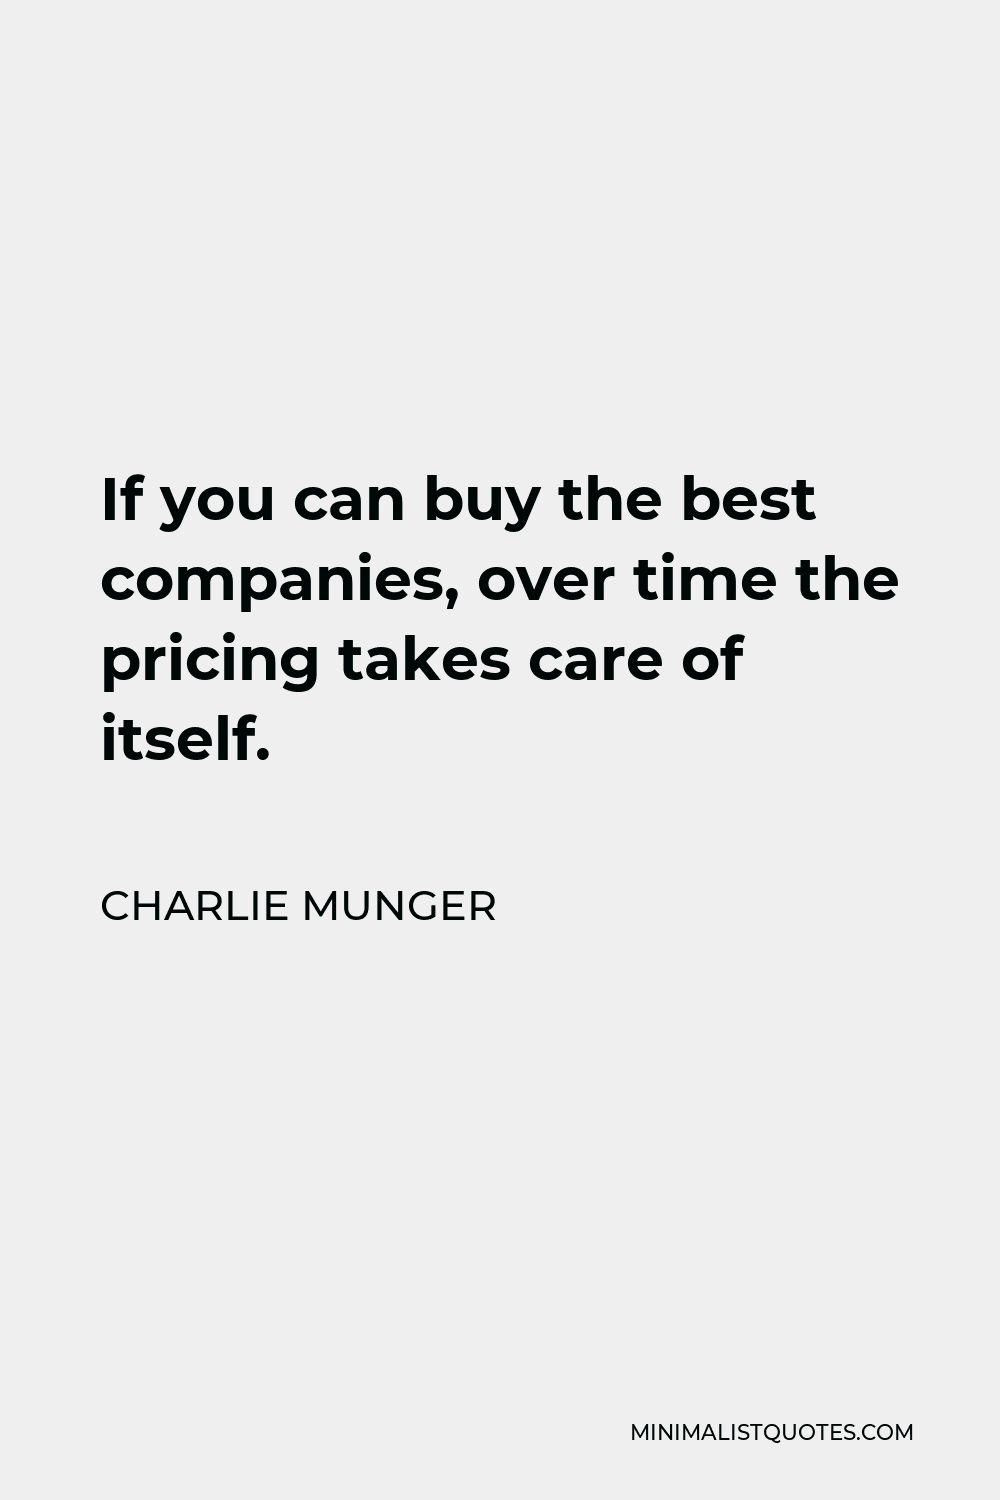 Charlie Munger Quote - If you can buy the best companies, over time the pricing takes care of itself.